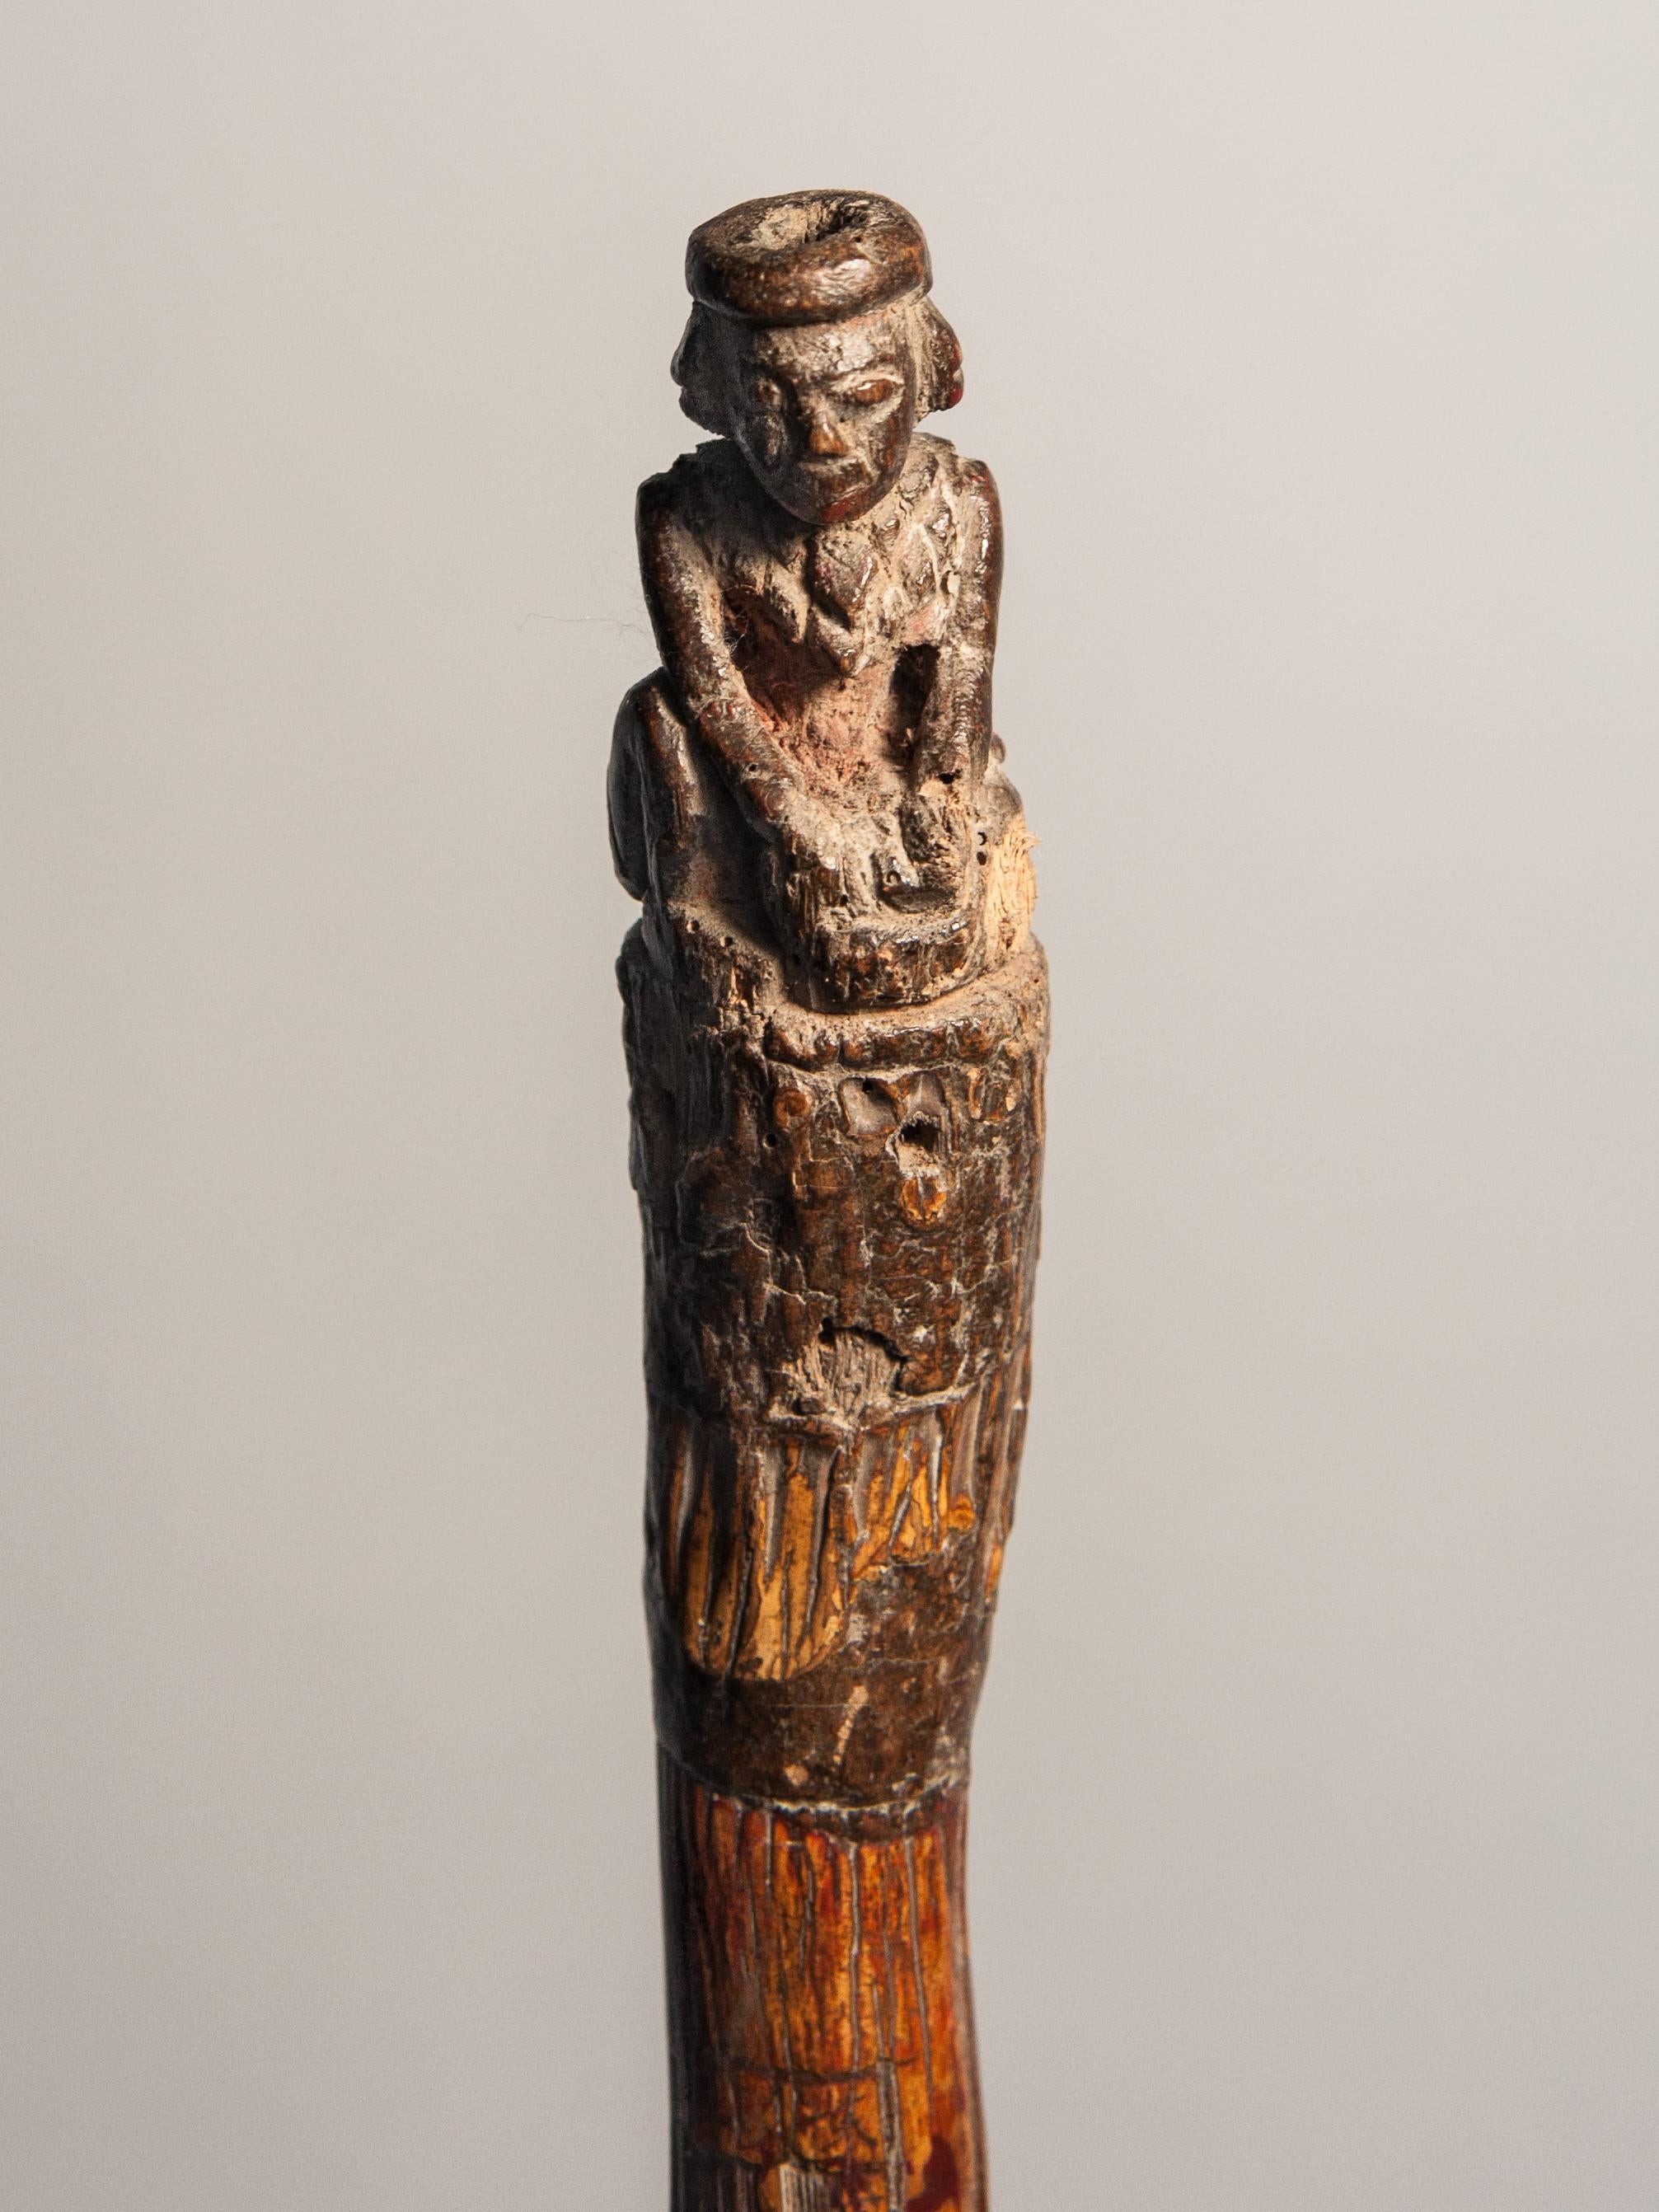 Vintage bamboo walking stick with carved figure, from Burma, early 20th century. Mounted on a wooden stand.
Condition: The piece is in fair to good condition. It is strong and structurally stable. The features of the carved figure have lost some of